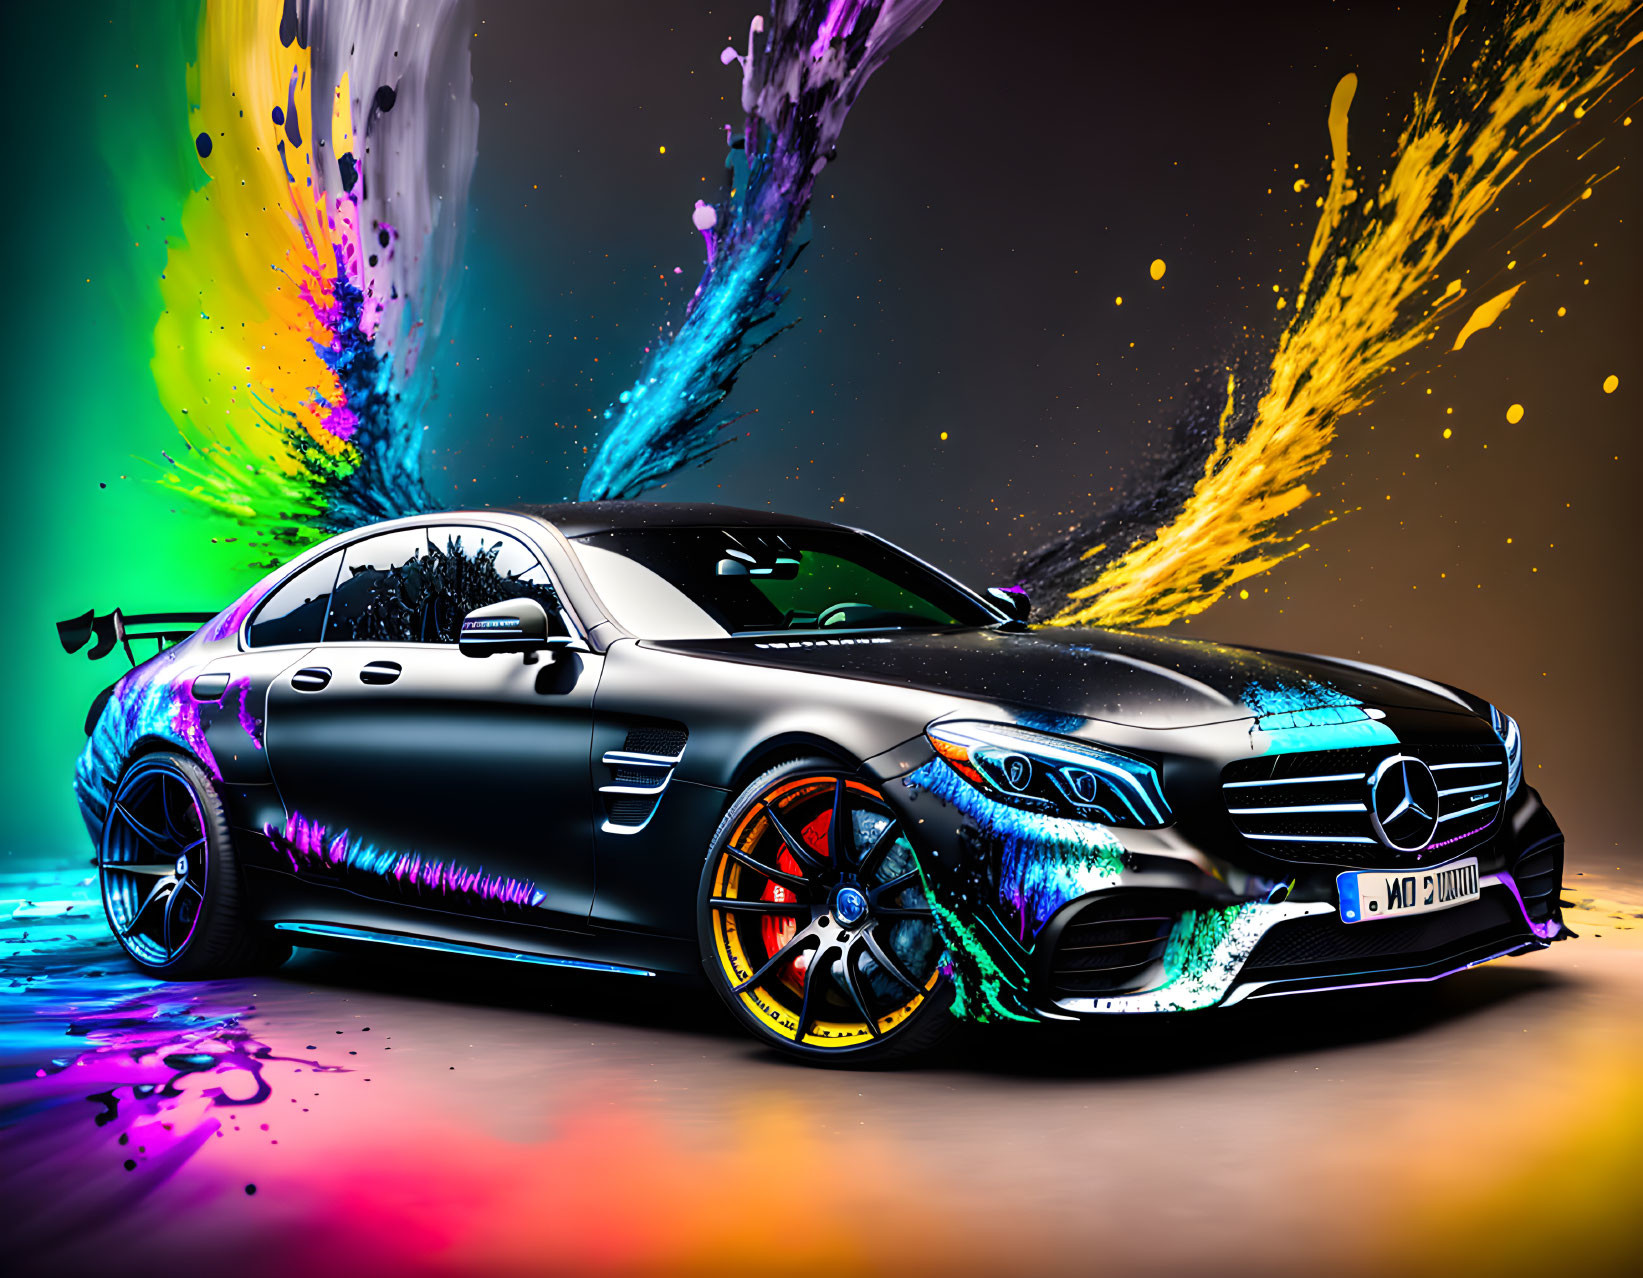 Glossy black Mercedes sports car against vibrant neon background